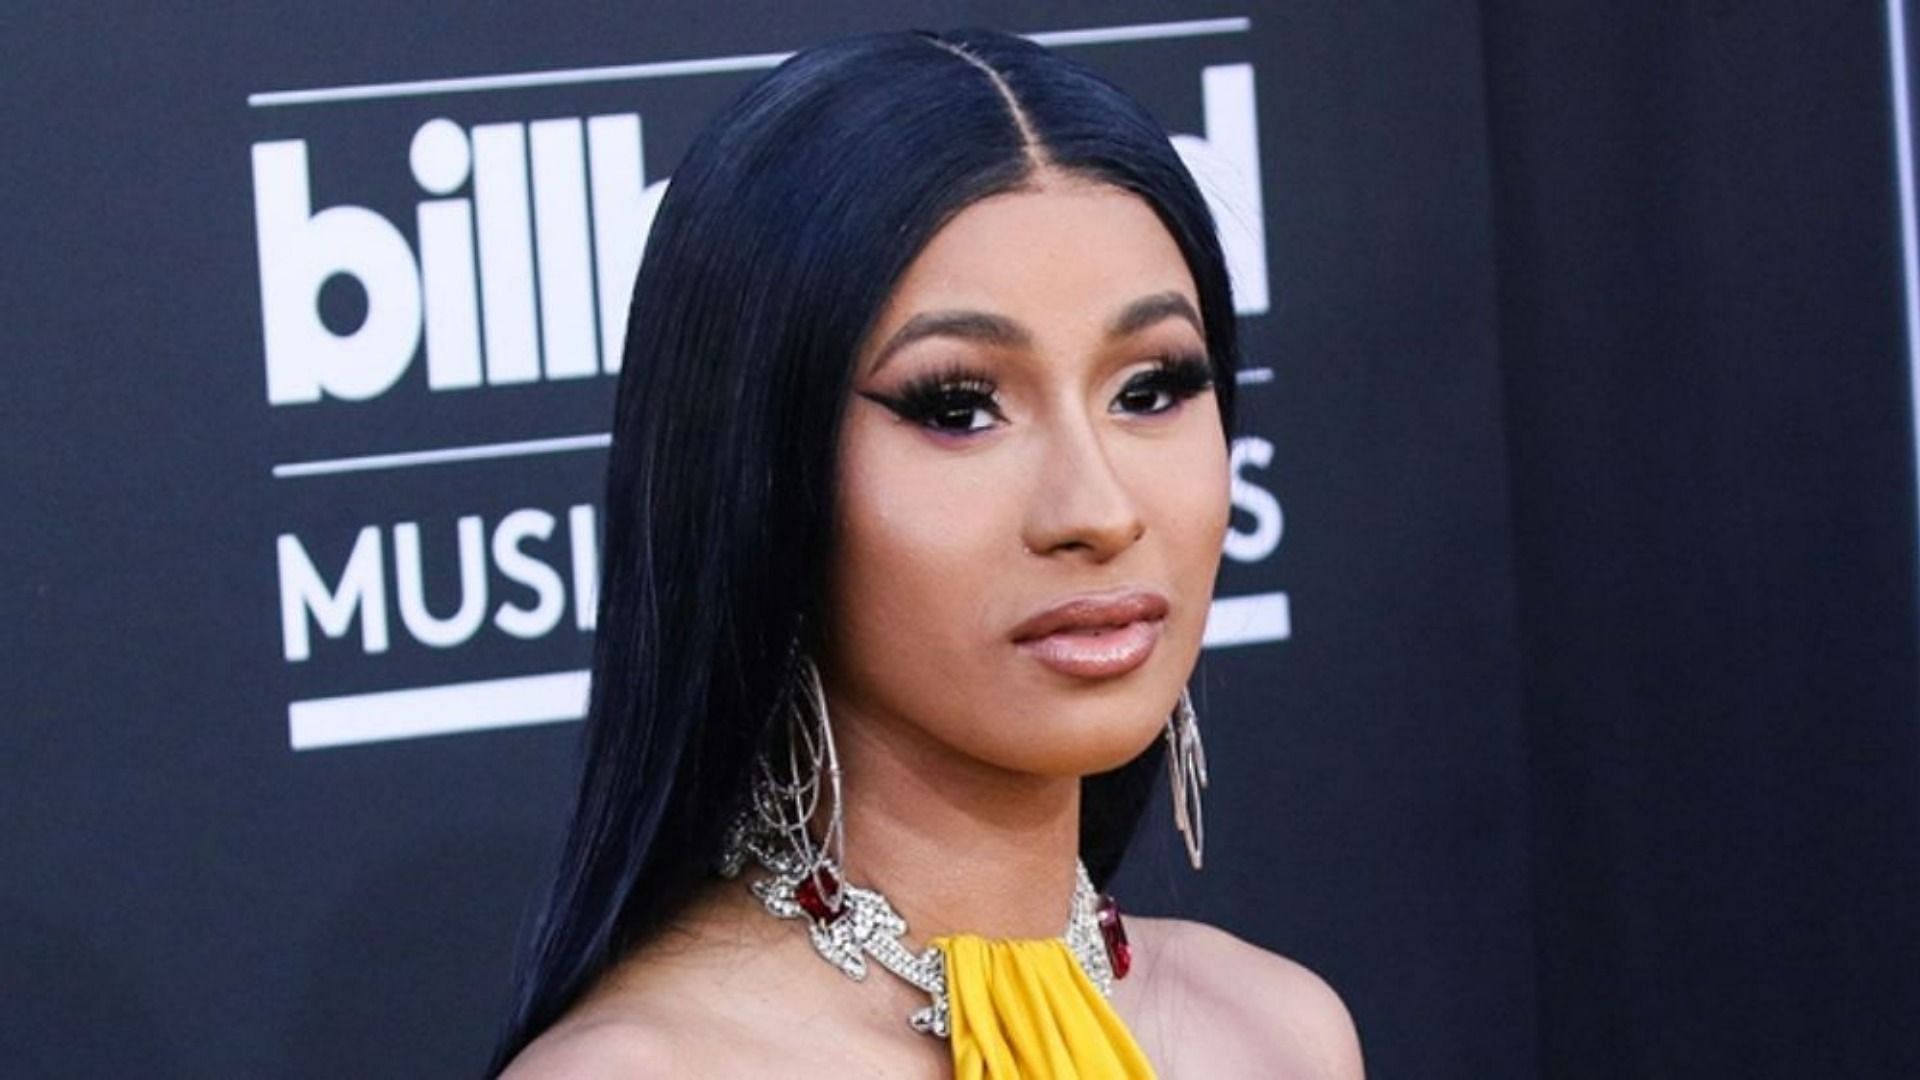 Cardi B deletes Twitter account following feud with fanbase (Image via AP)